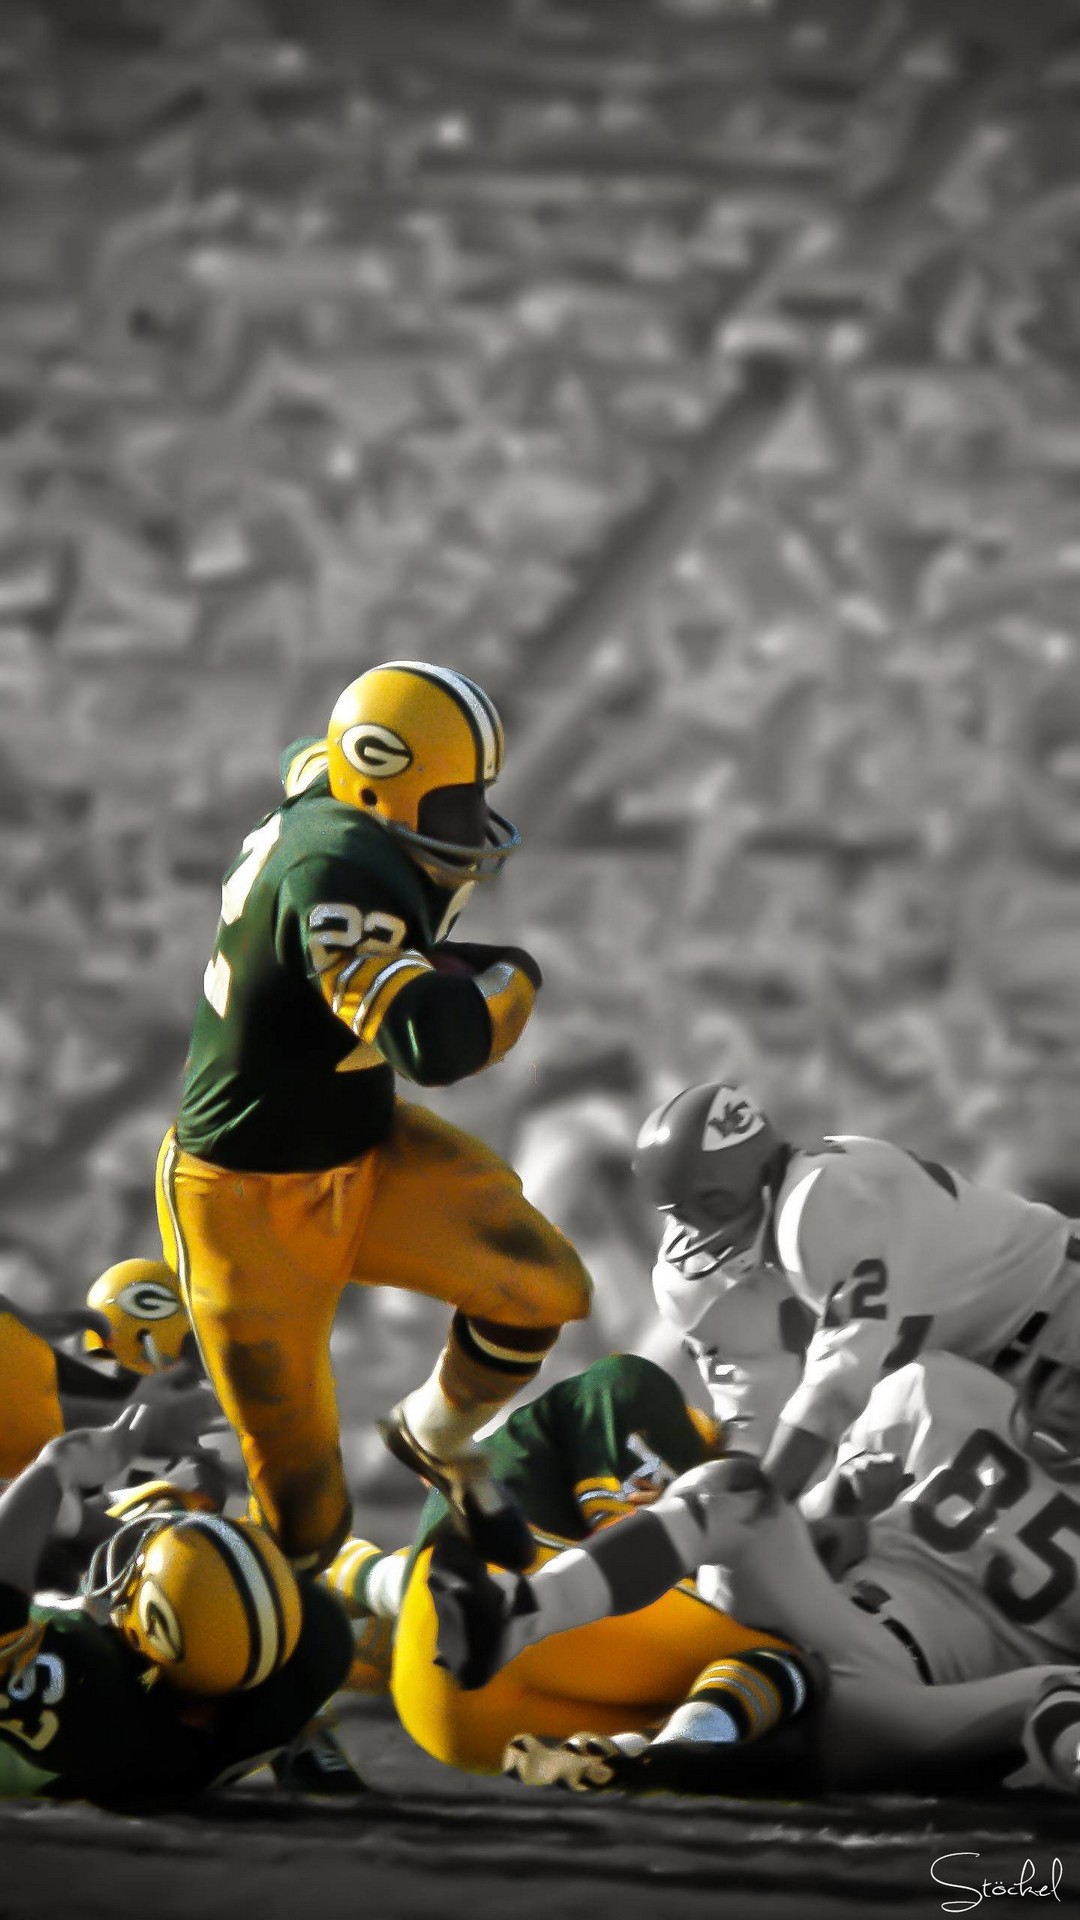 Green Bay Packers iPhone Wallpaper Tumblr With high-resolution 1080X1920 pixel. Download and set as wallpaper for Apple iPhone X, XS Max, XR, 8, 7, 6, SE, iPad, Android